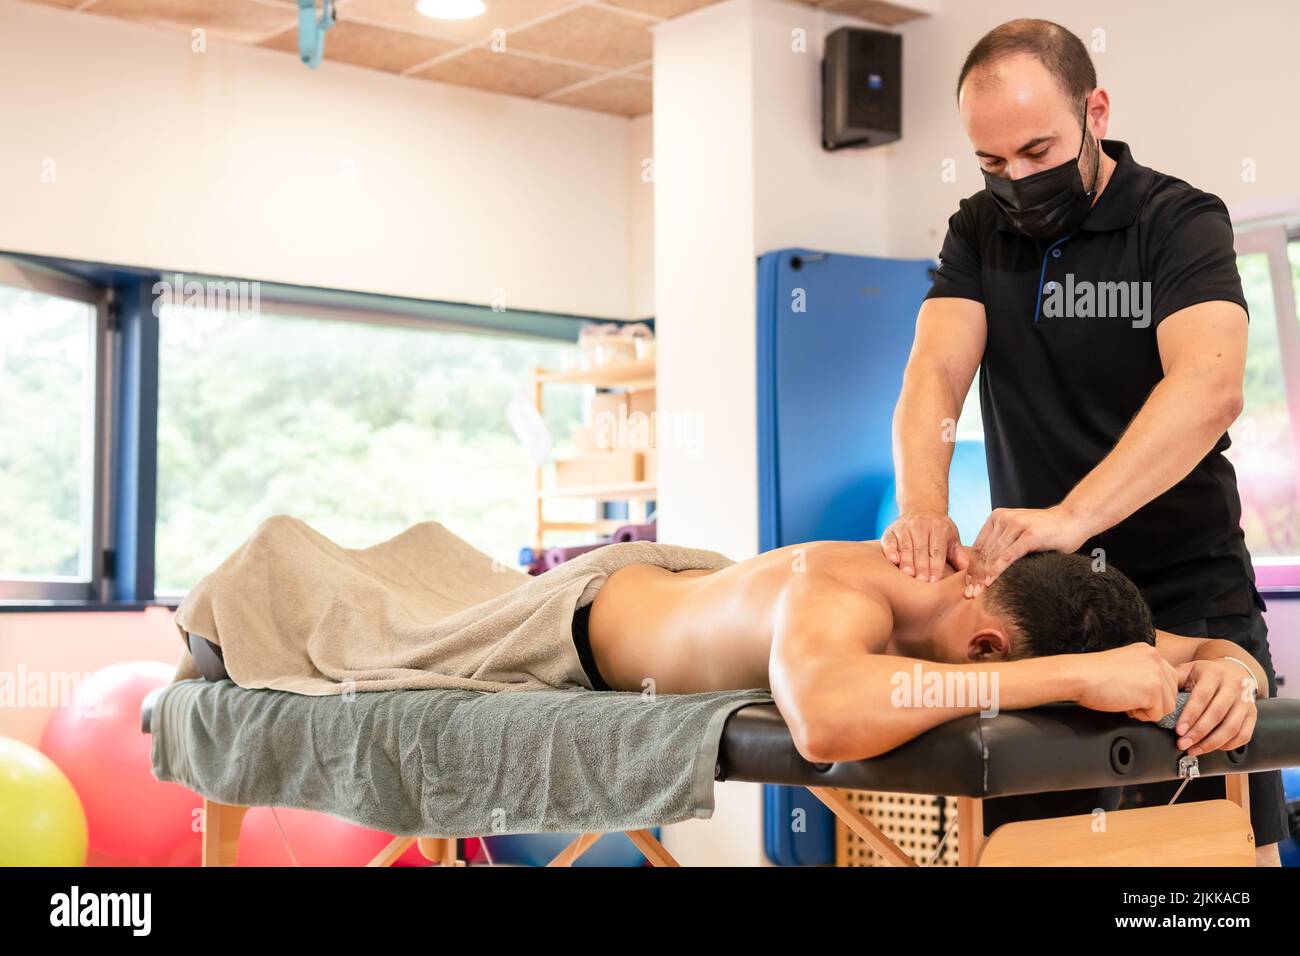 An athletic man receiving a recovery massage by a physiotherapist on a table, therapeutic back massage and osteopathy Stock Photo